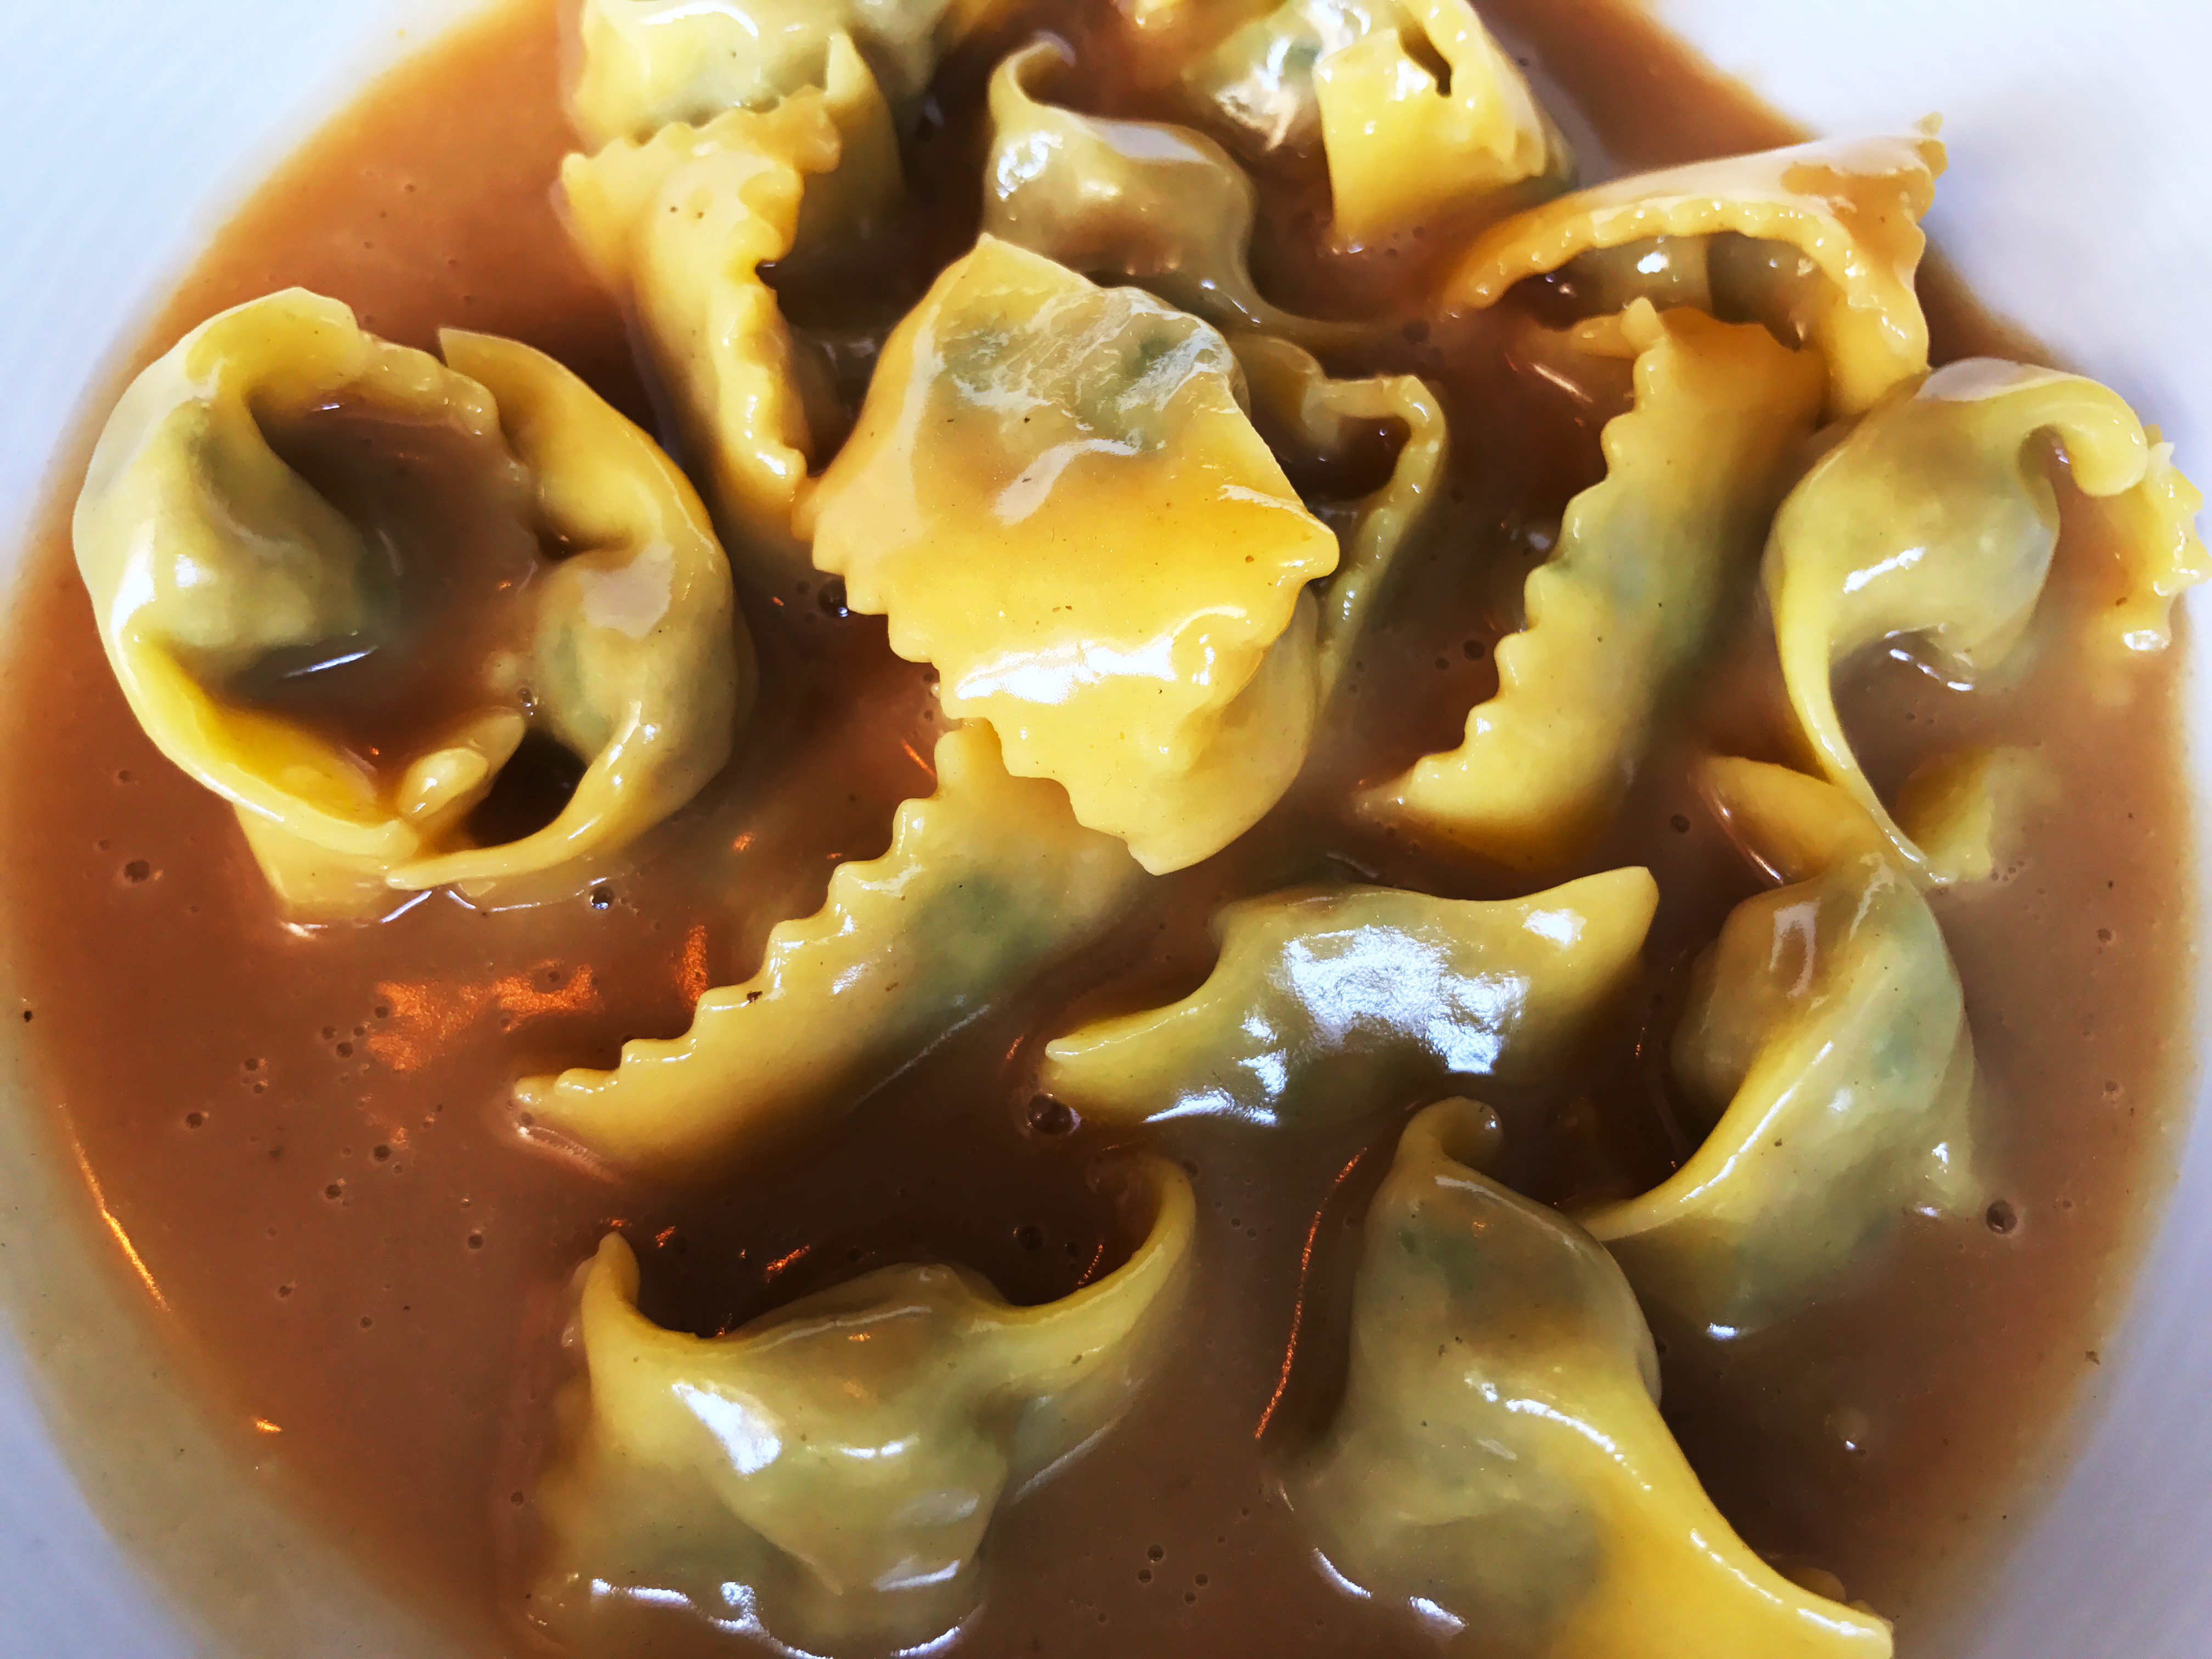 Agnolotti di Lidia, stuffed with a blend of meats in a rich beef reduction sauce.